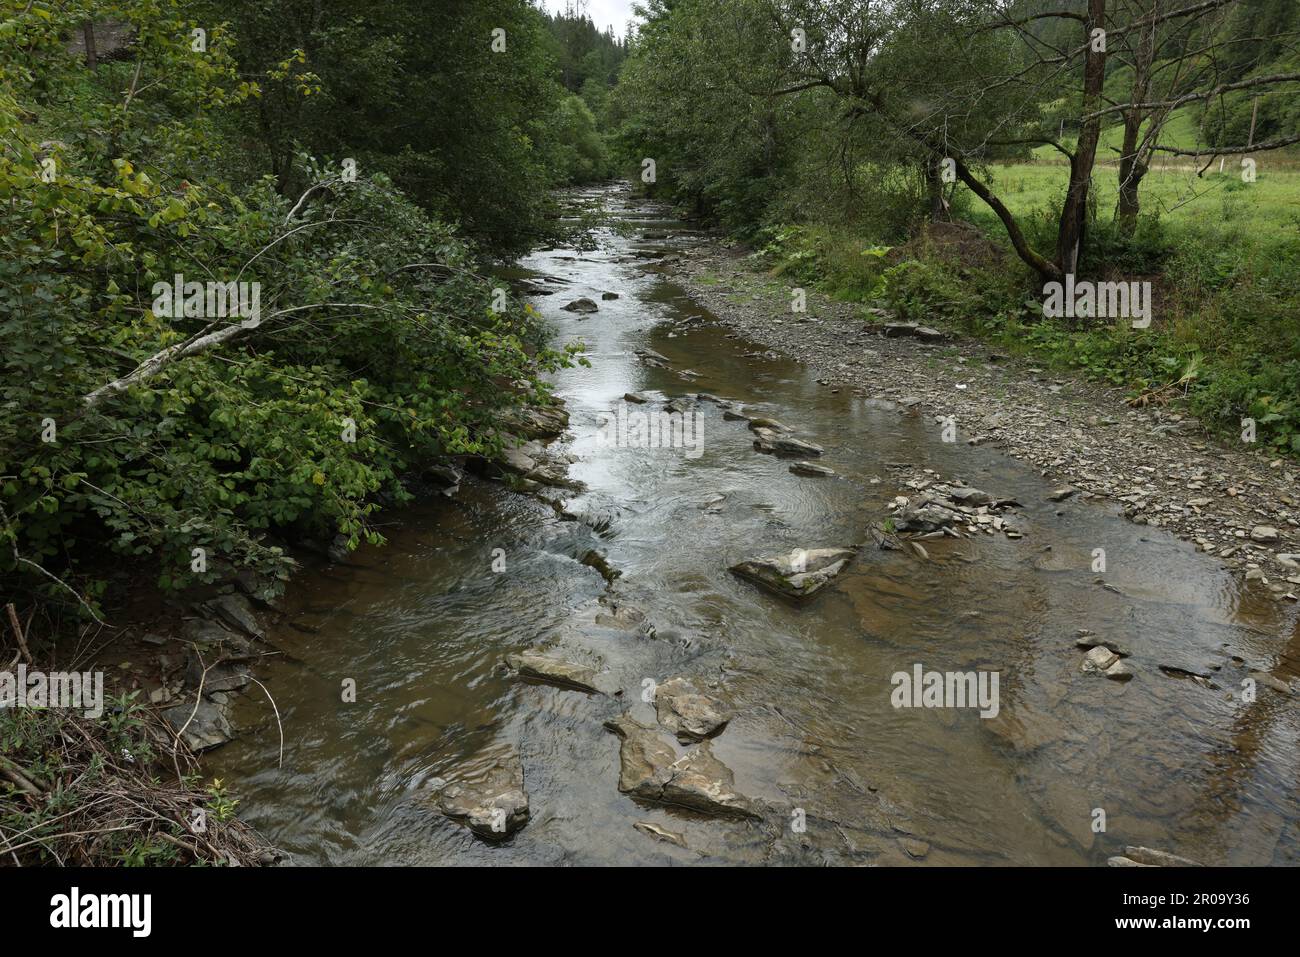 Picturesque view of river surrounded by green plants in forest Stock Photo